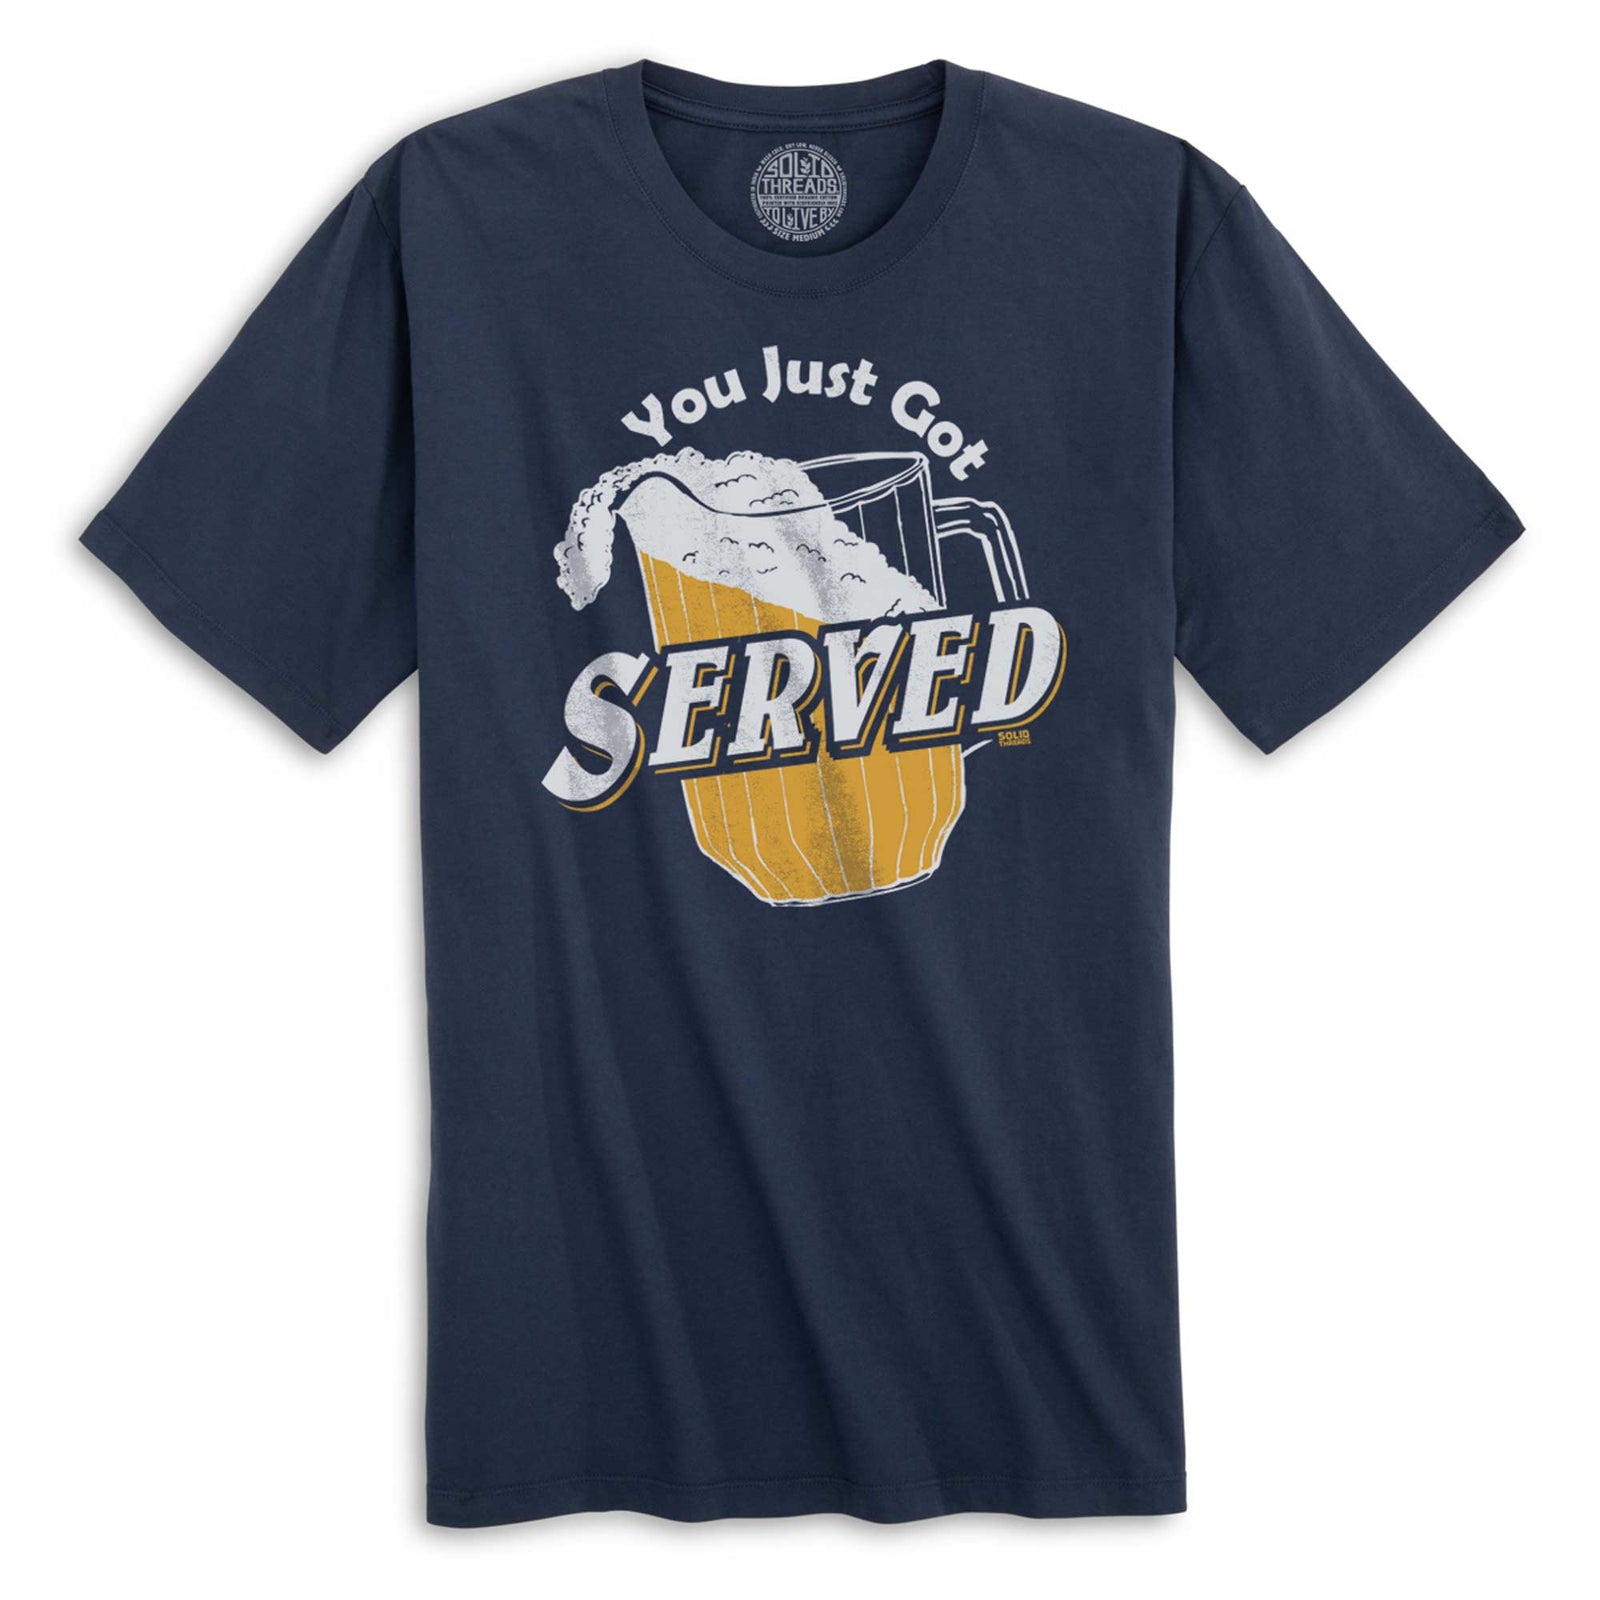 You Just Got Served Funny Organic Cotton T-shirt | Vintage Beer Drinking Tee | Solid Threads